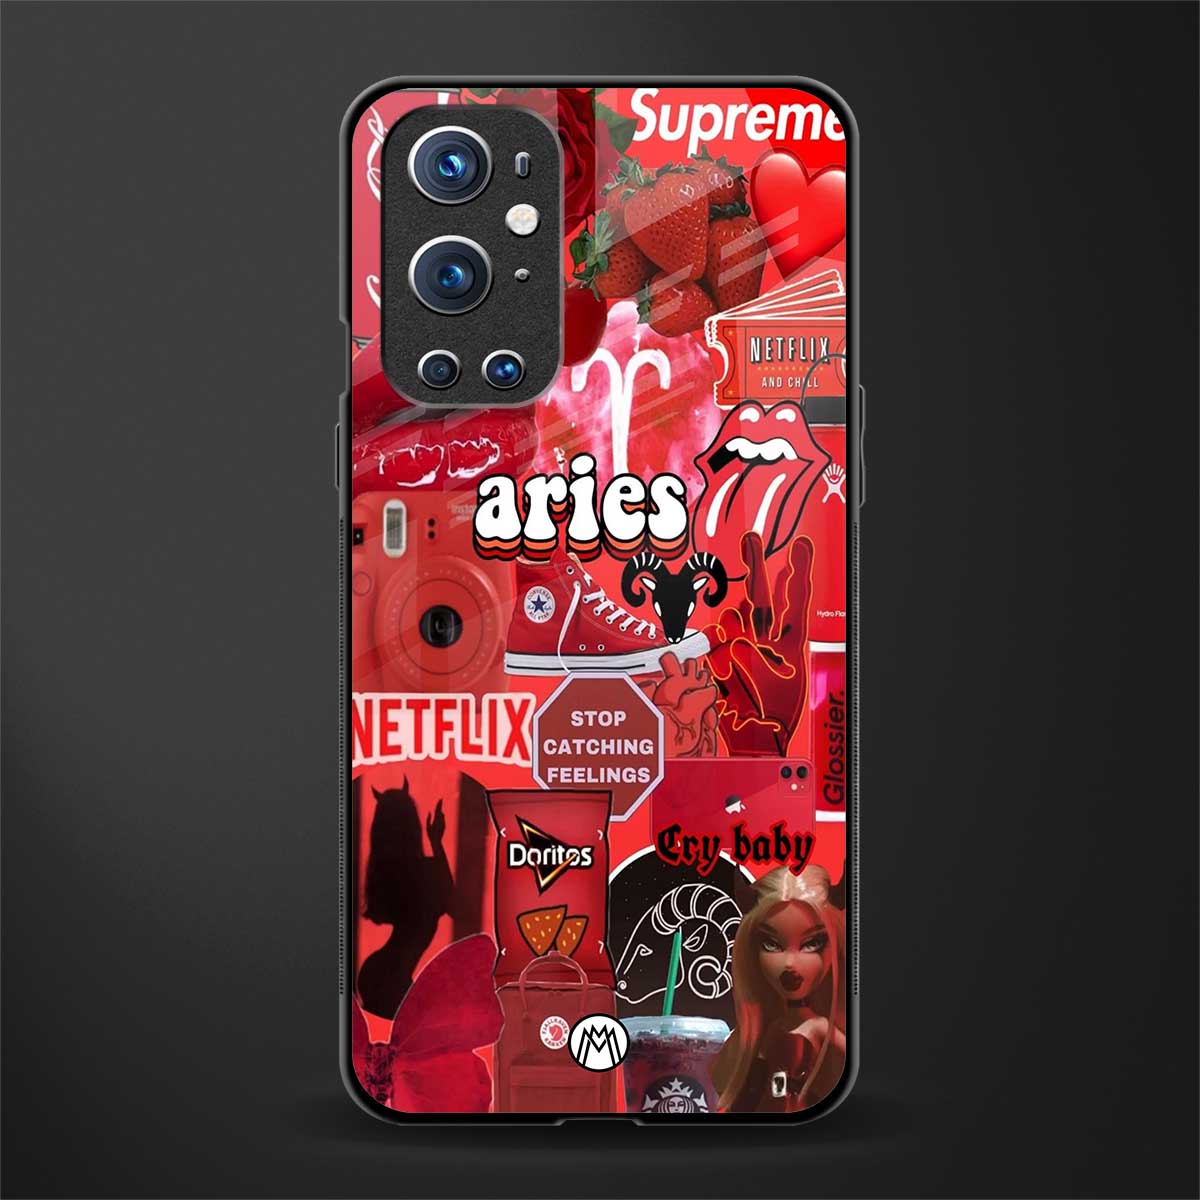 aries aesthetic collage glass case for oneplus 9 pro image